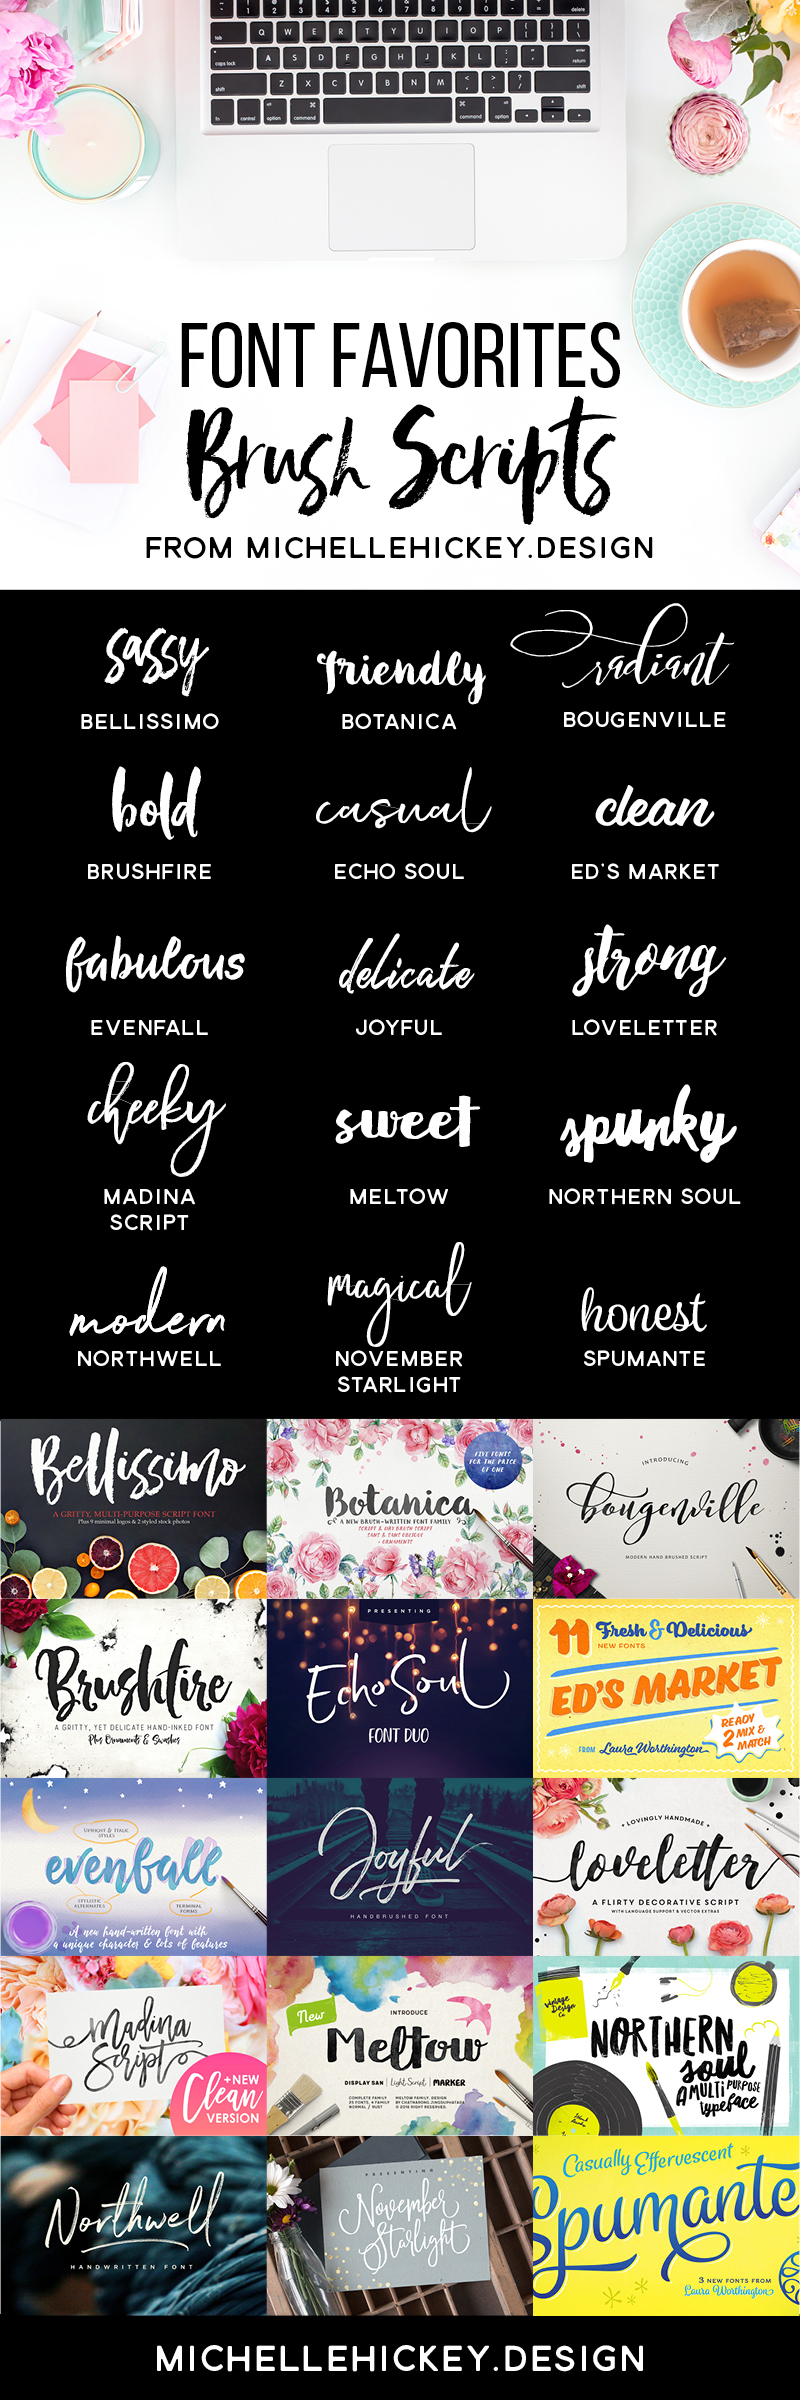 A collection of brush script fonts and typefaces for all of your graphic design, DIY, or blogging projects. Most of these fonts families are under $20 and come with swashes, alternate ligatures and extras! // Roundup from MichelleHickey.Design